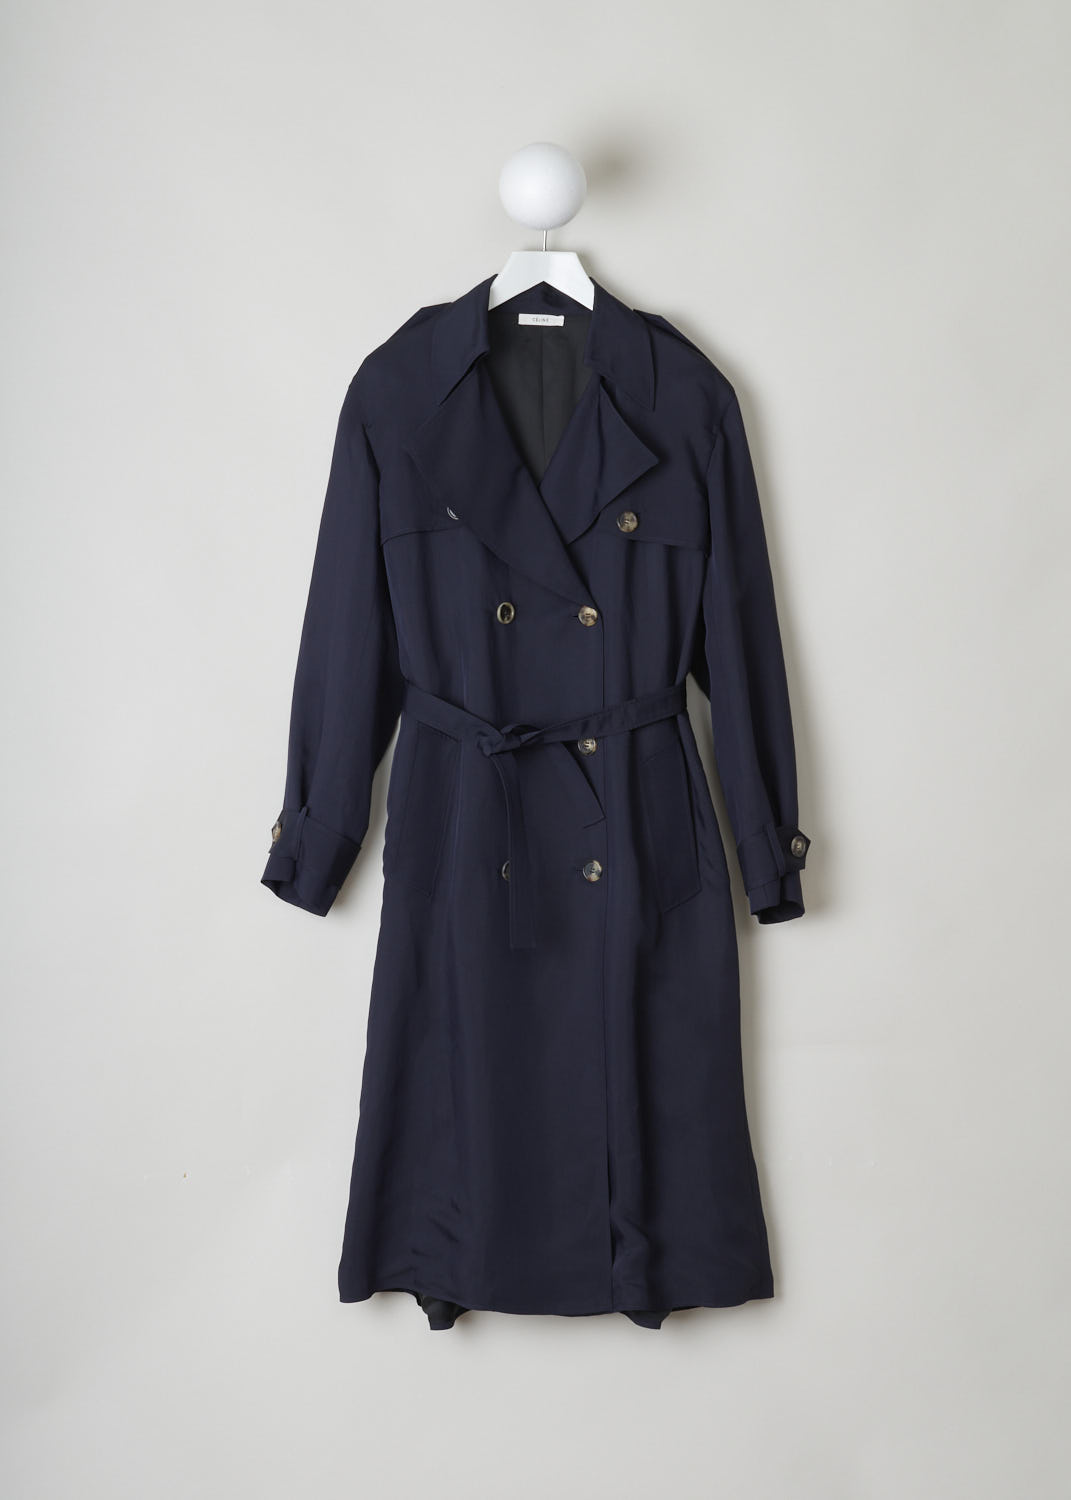 CÃ‰LINE, MIDNIGHT BLUE RAINCOAT, 6464_28U36_0MI_C01, Blue, Front, Elegant midnight blue trench coat. The coat has a notched lapel and classic details such as epaulets and storm flaps. Two rows of buttons form the closing option. The coat comes with a matching belt to cinch in the waist. The long sleeves have sleeve straps on the cuffs. A slanted pocket can be found on either side. In the back, the coat has a centre slit.